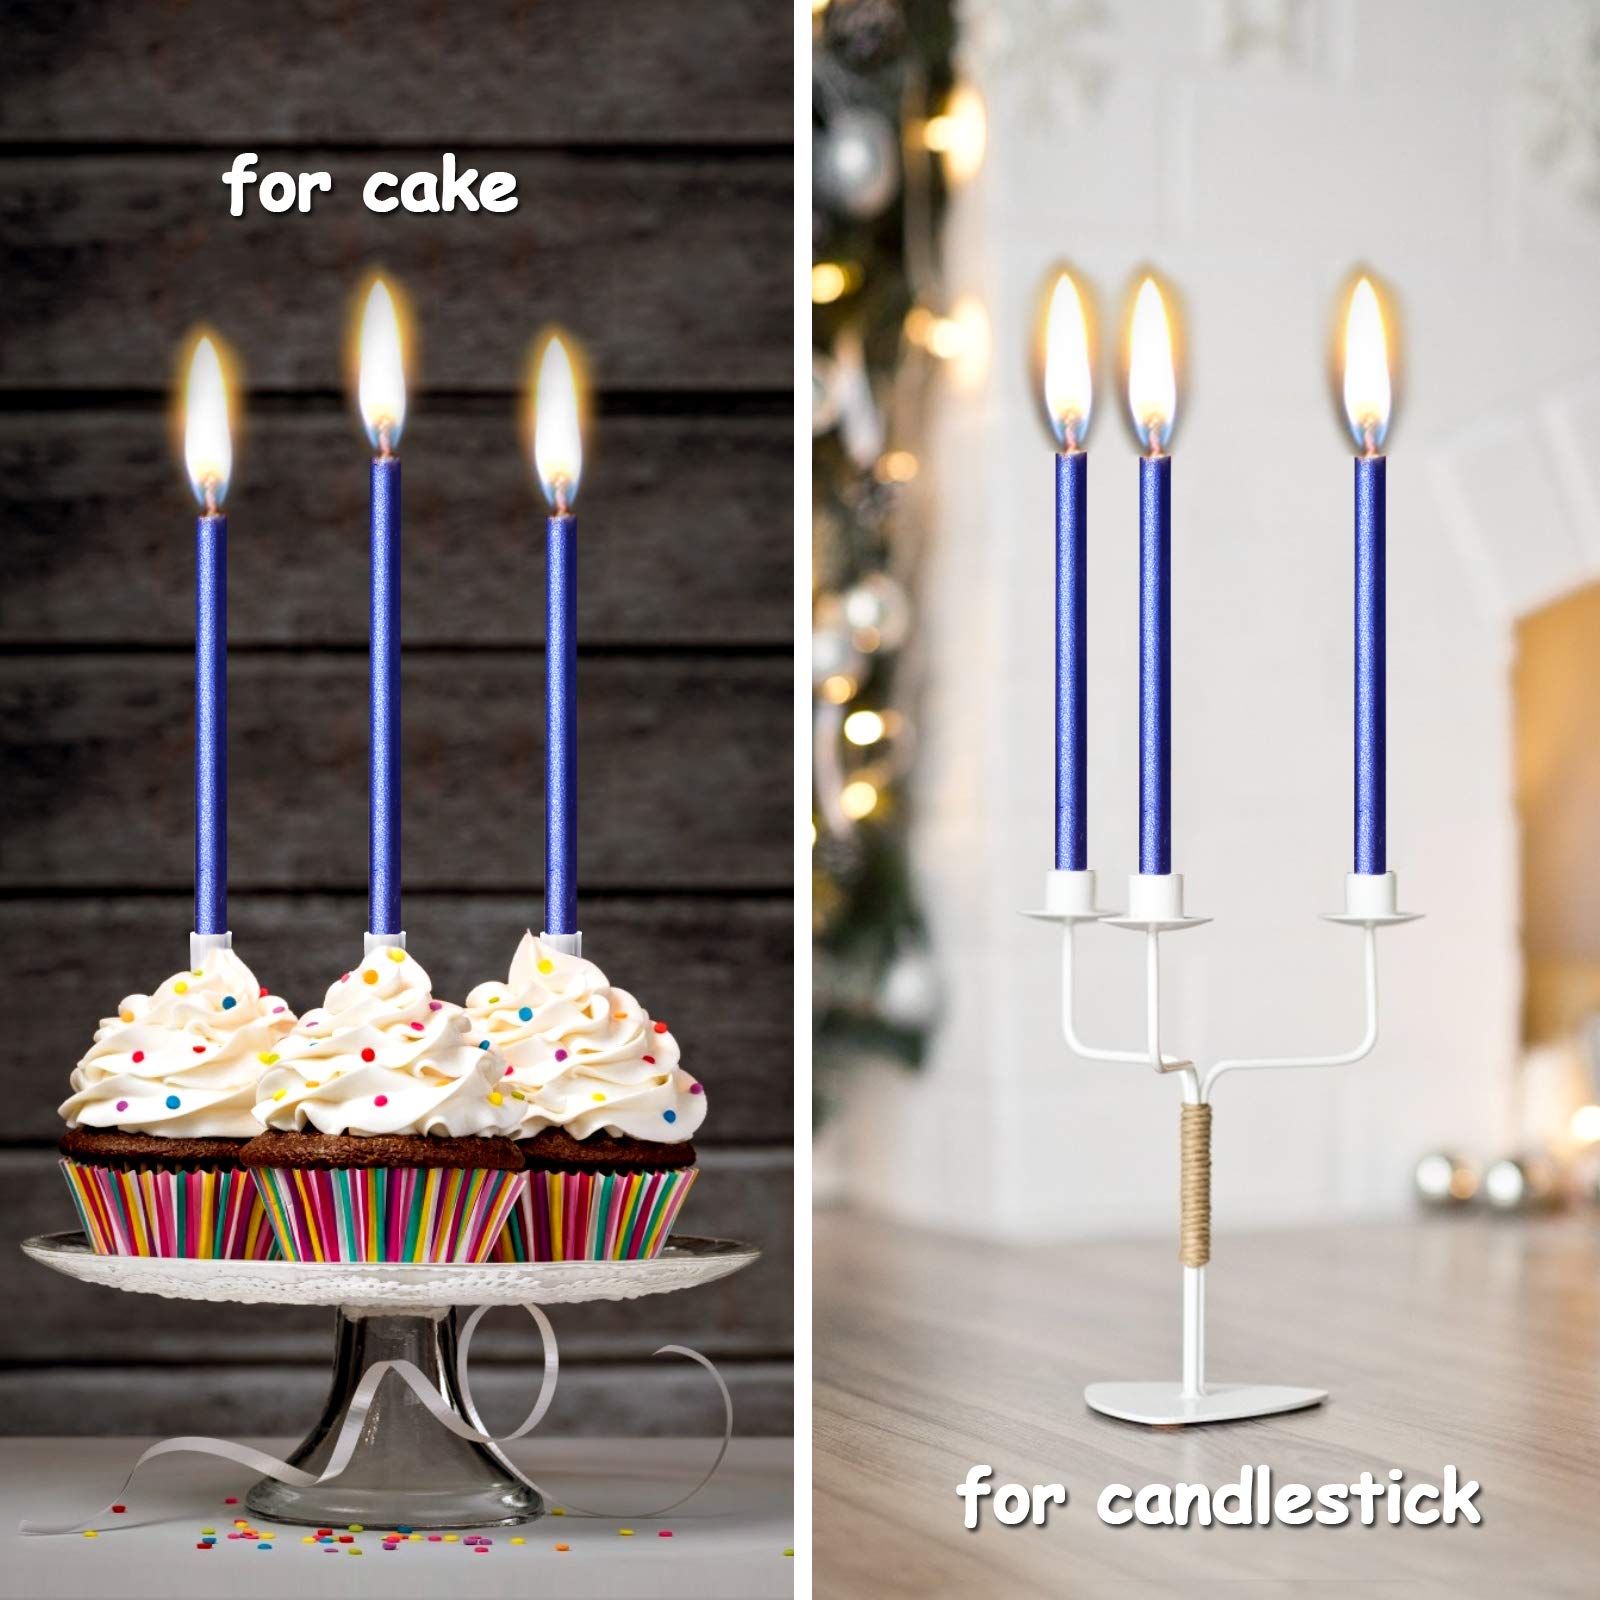 12PCS Birthday Candles with Real Flames Party Supplies for Cakes Sparkler Candles for Birthday Dinner Party (Blue)